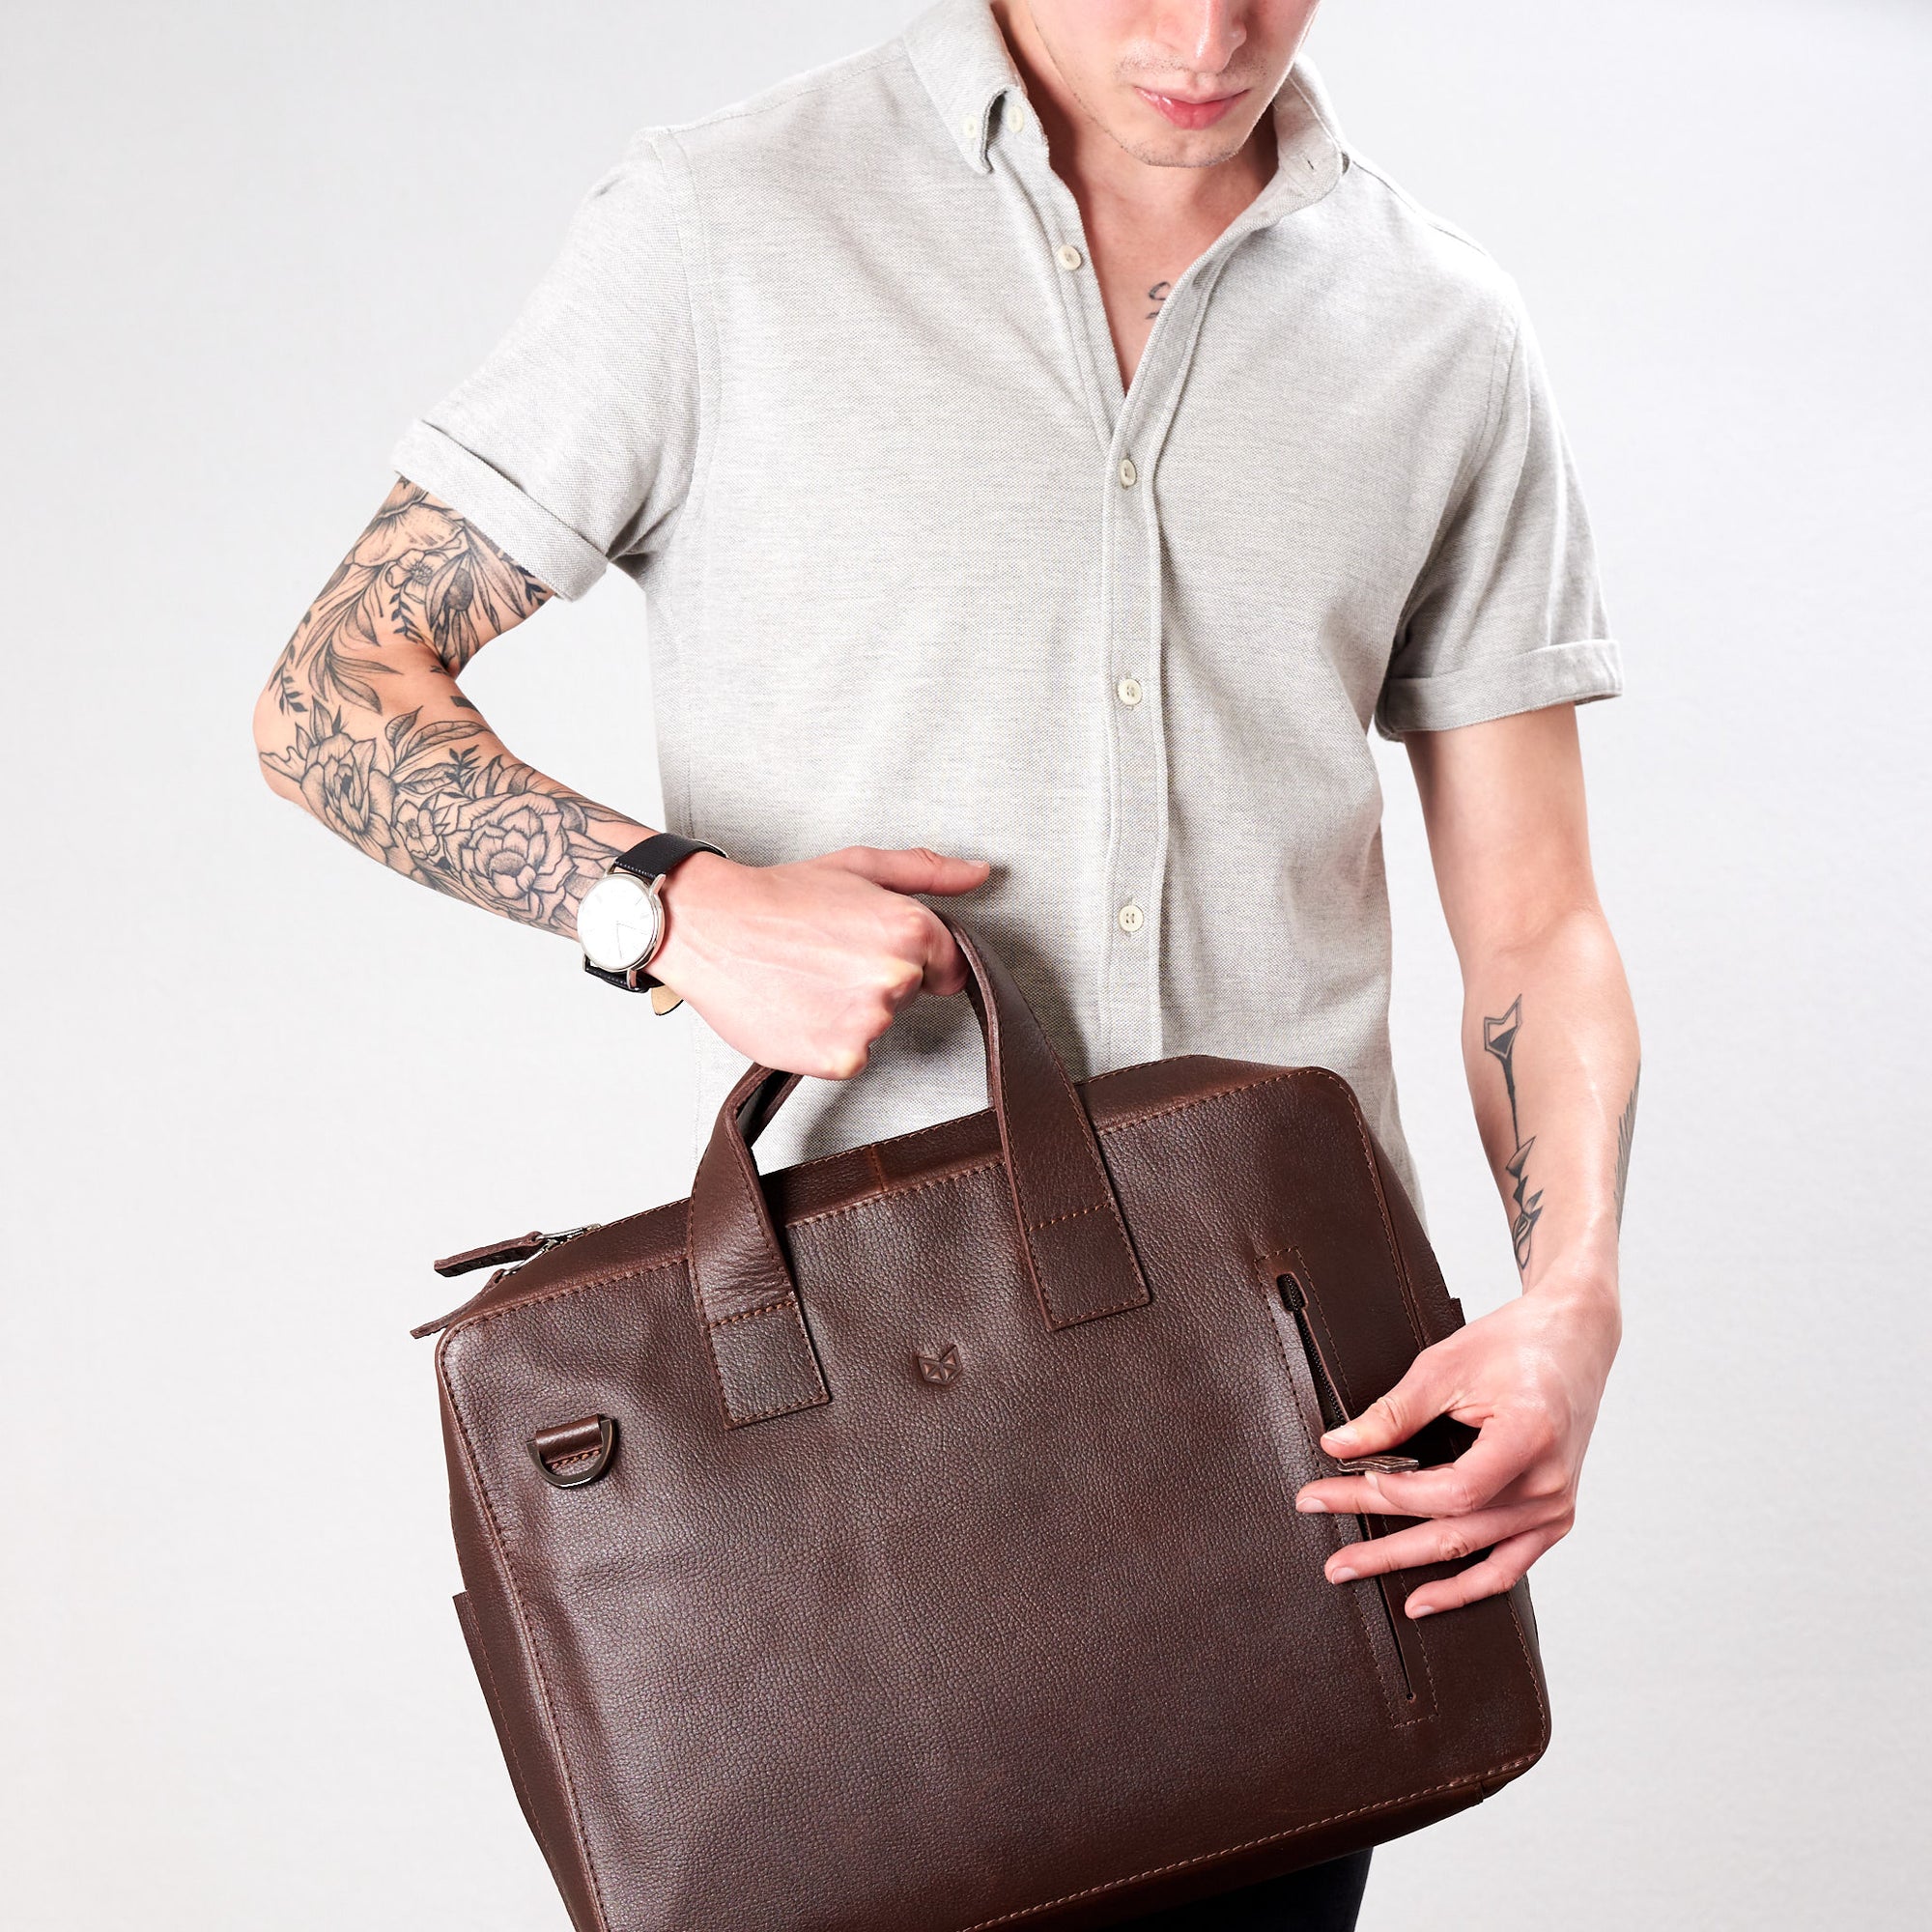 Front. Soft leather briefcase dark brown color